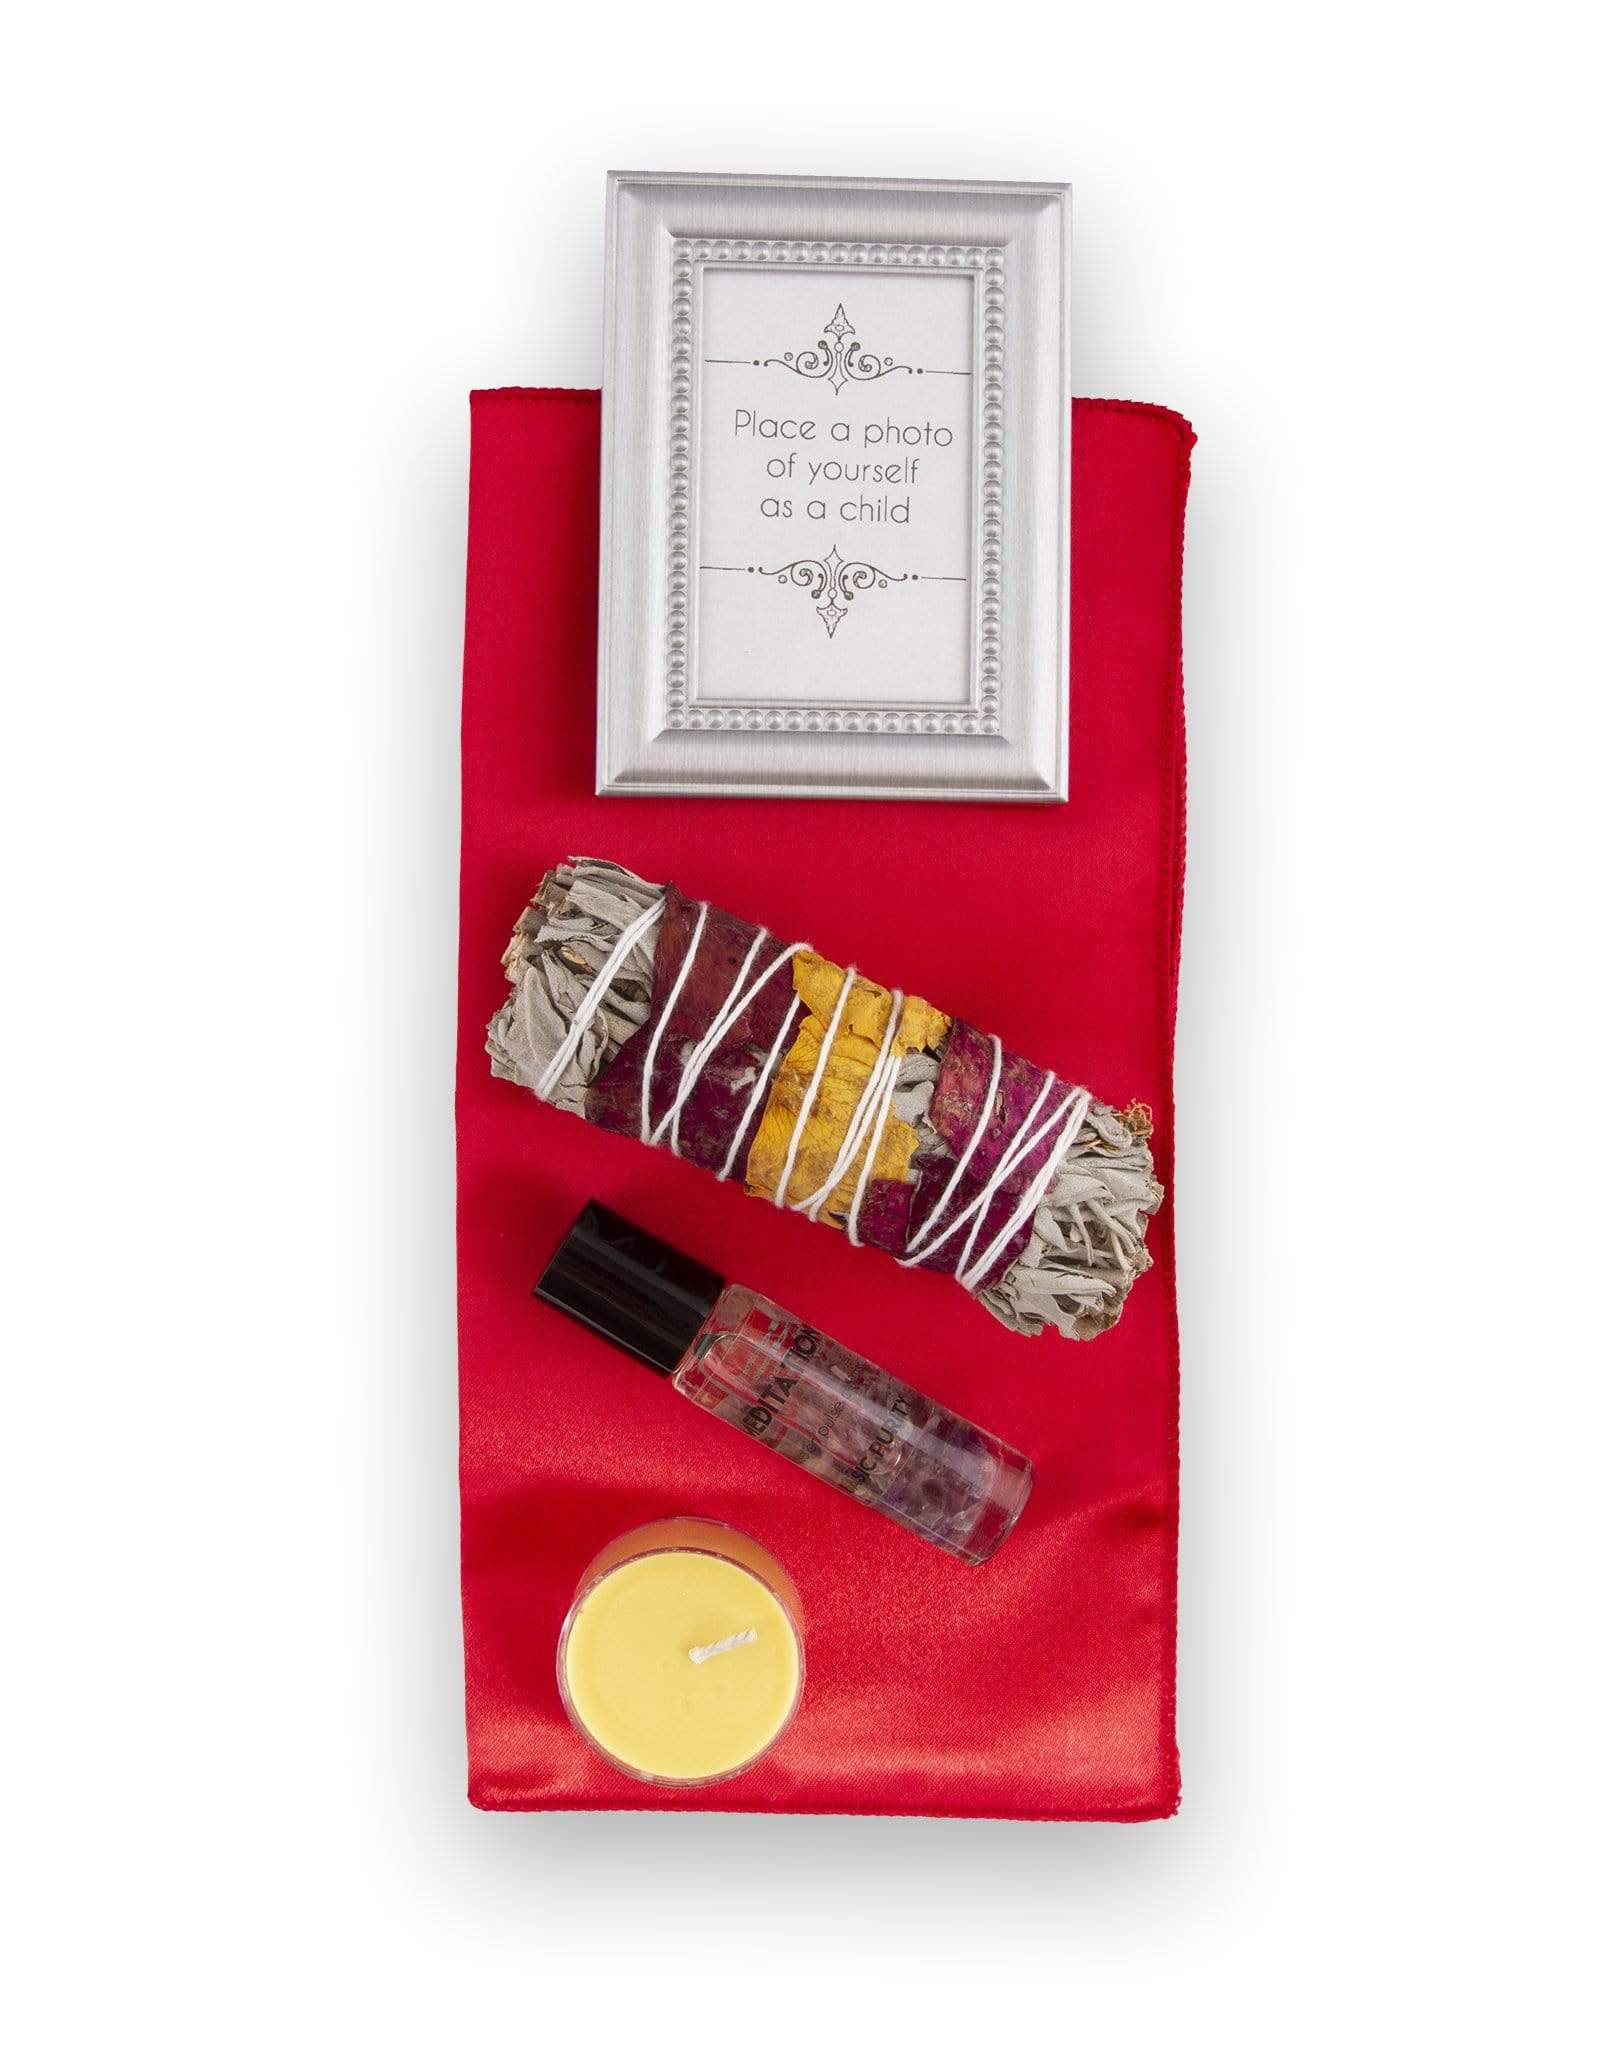 connect to divine healing kit with meditation included